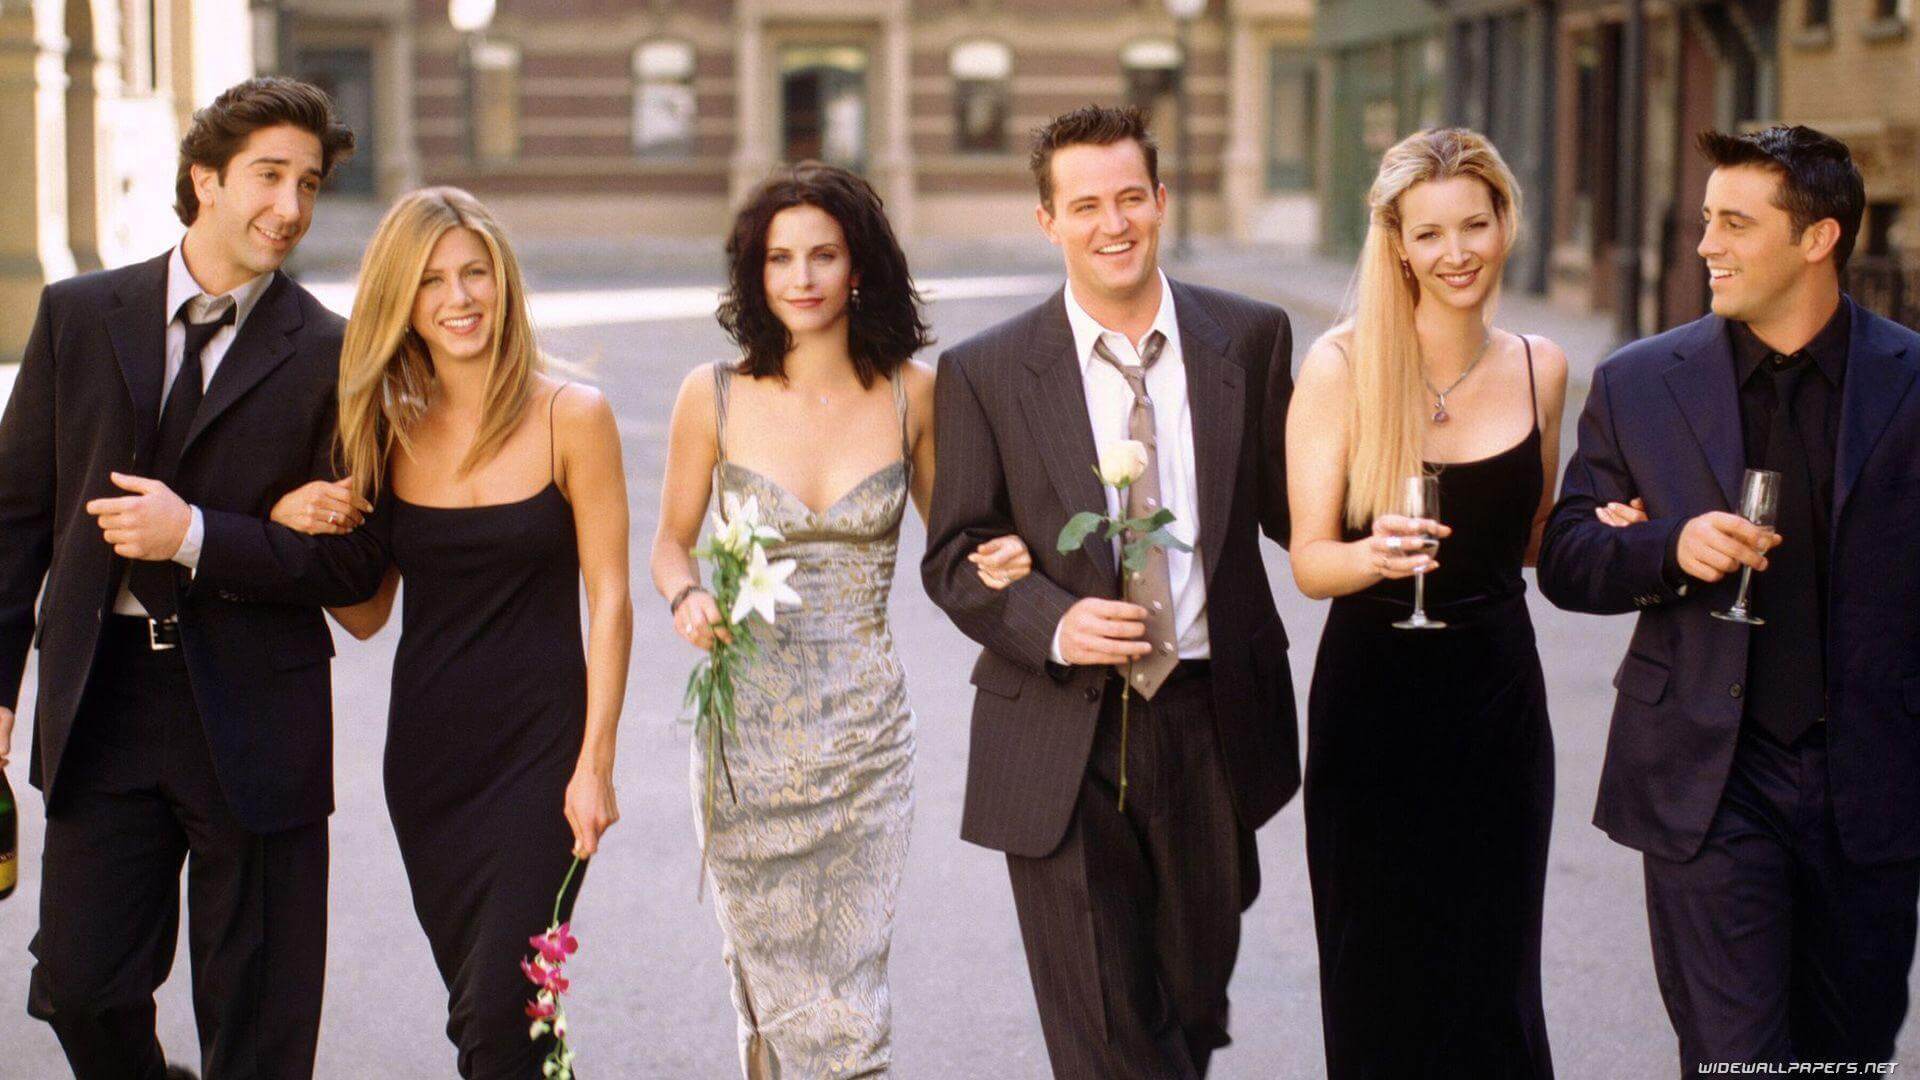 Friends: The Reunion / The One Where They Get Back Together